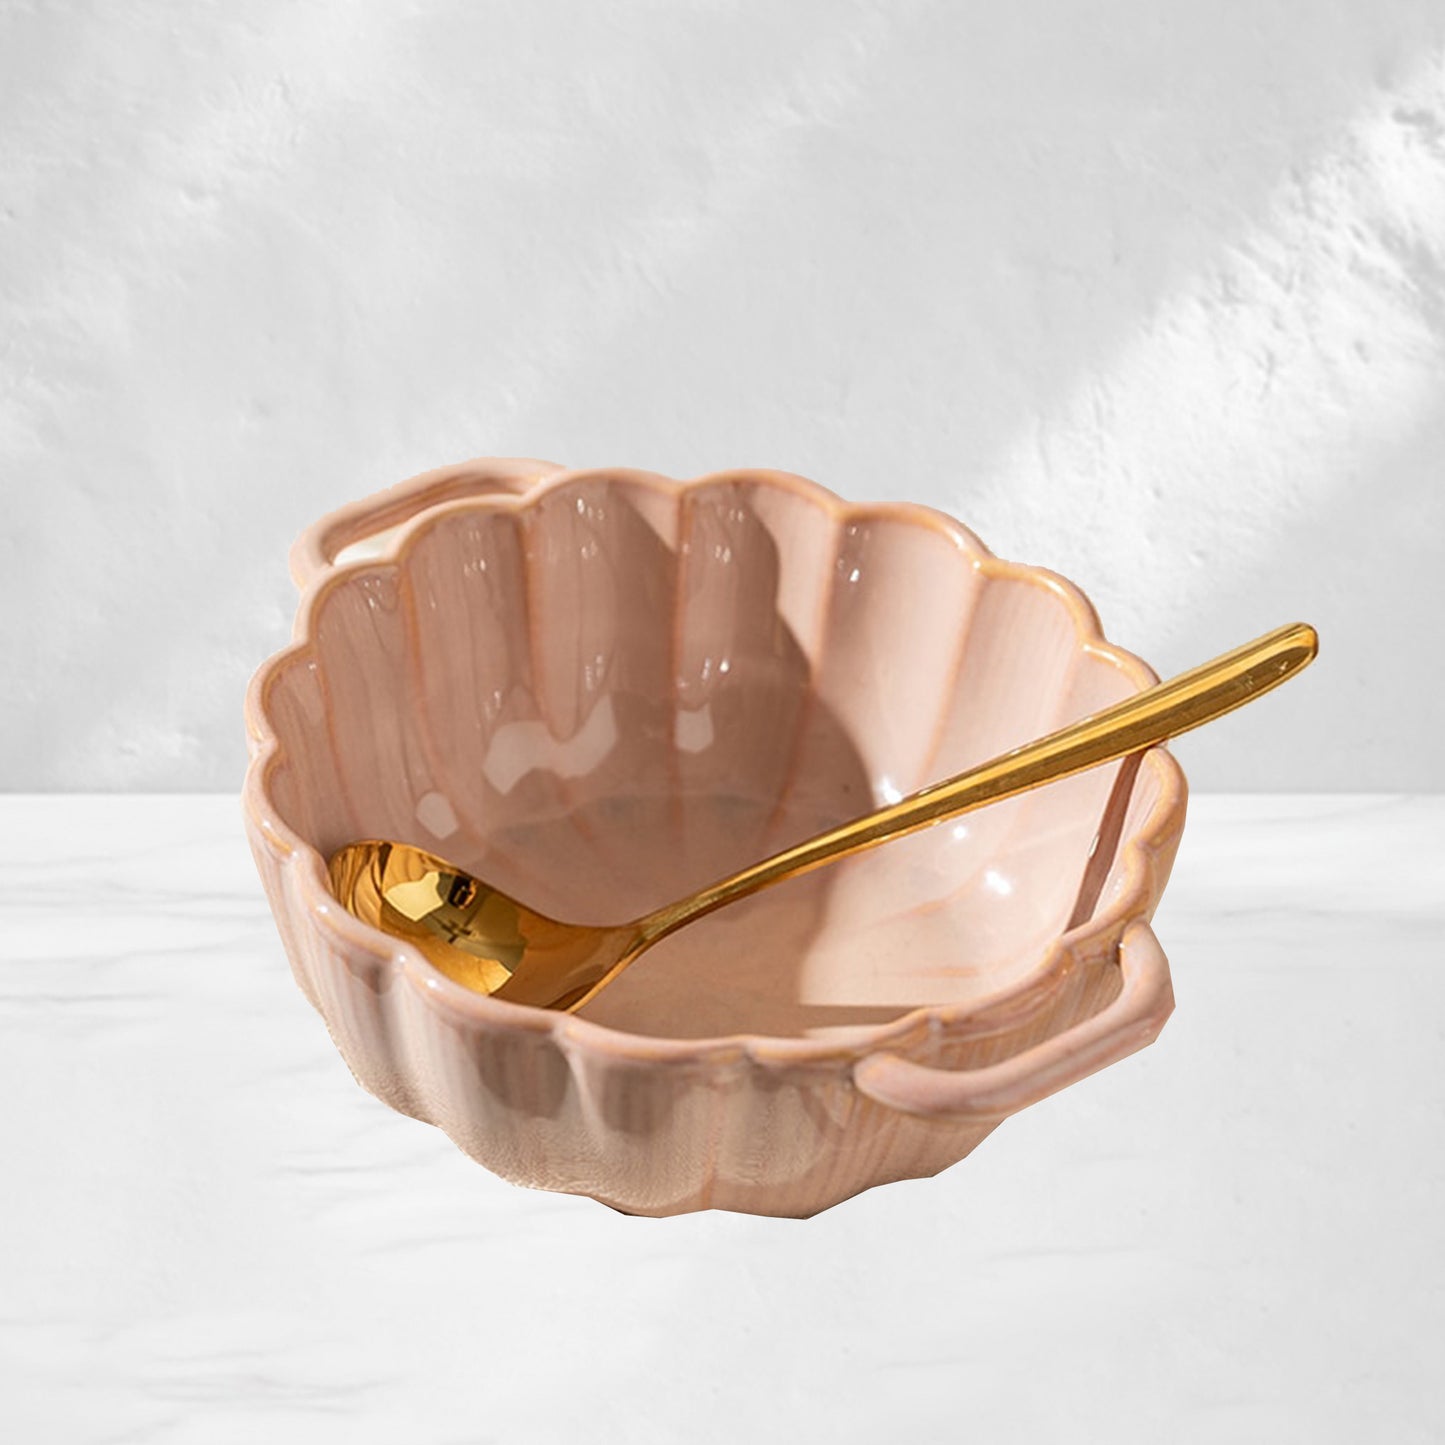 Pink Ceramic Bowls With Handle